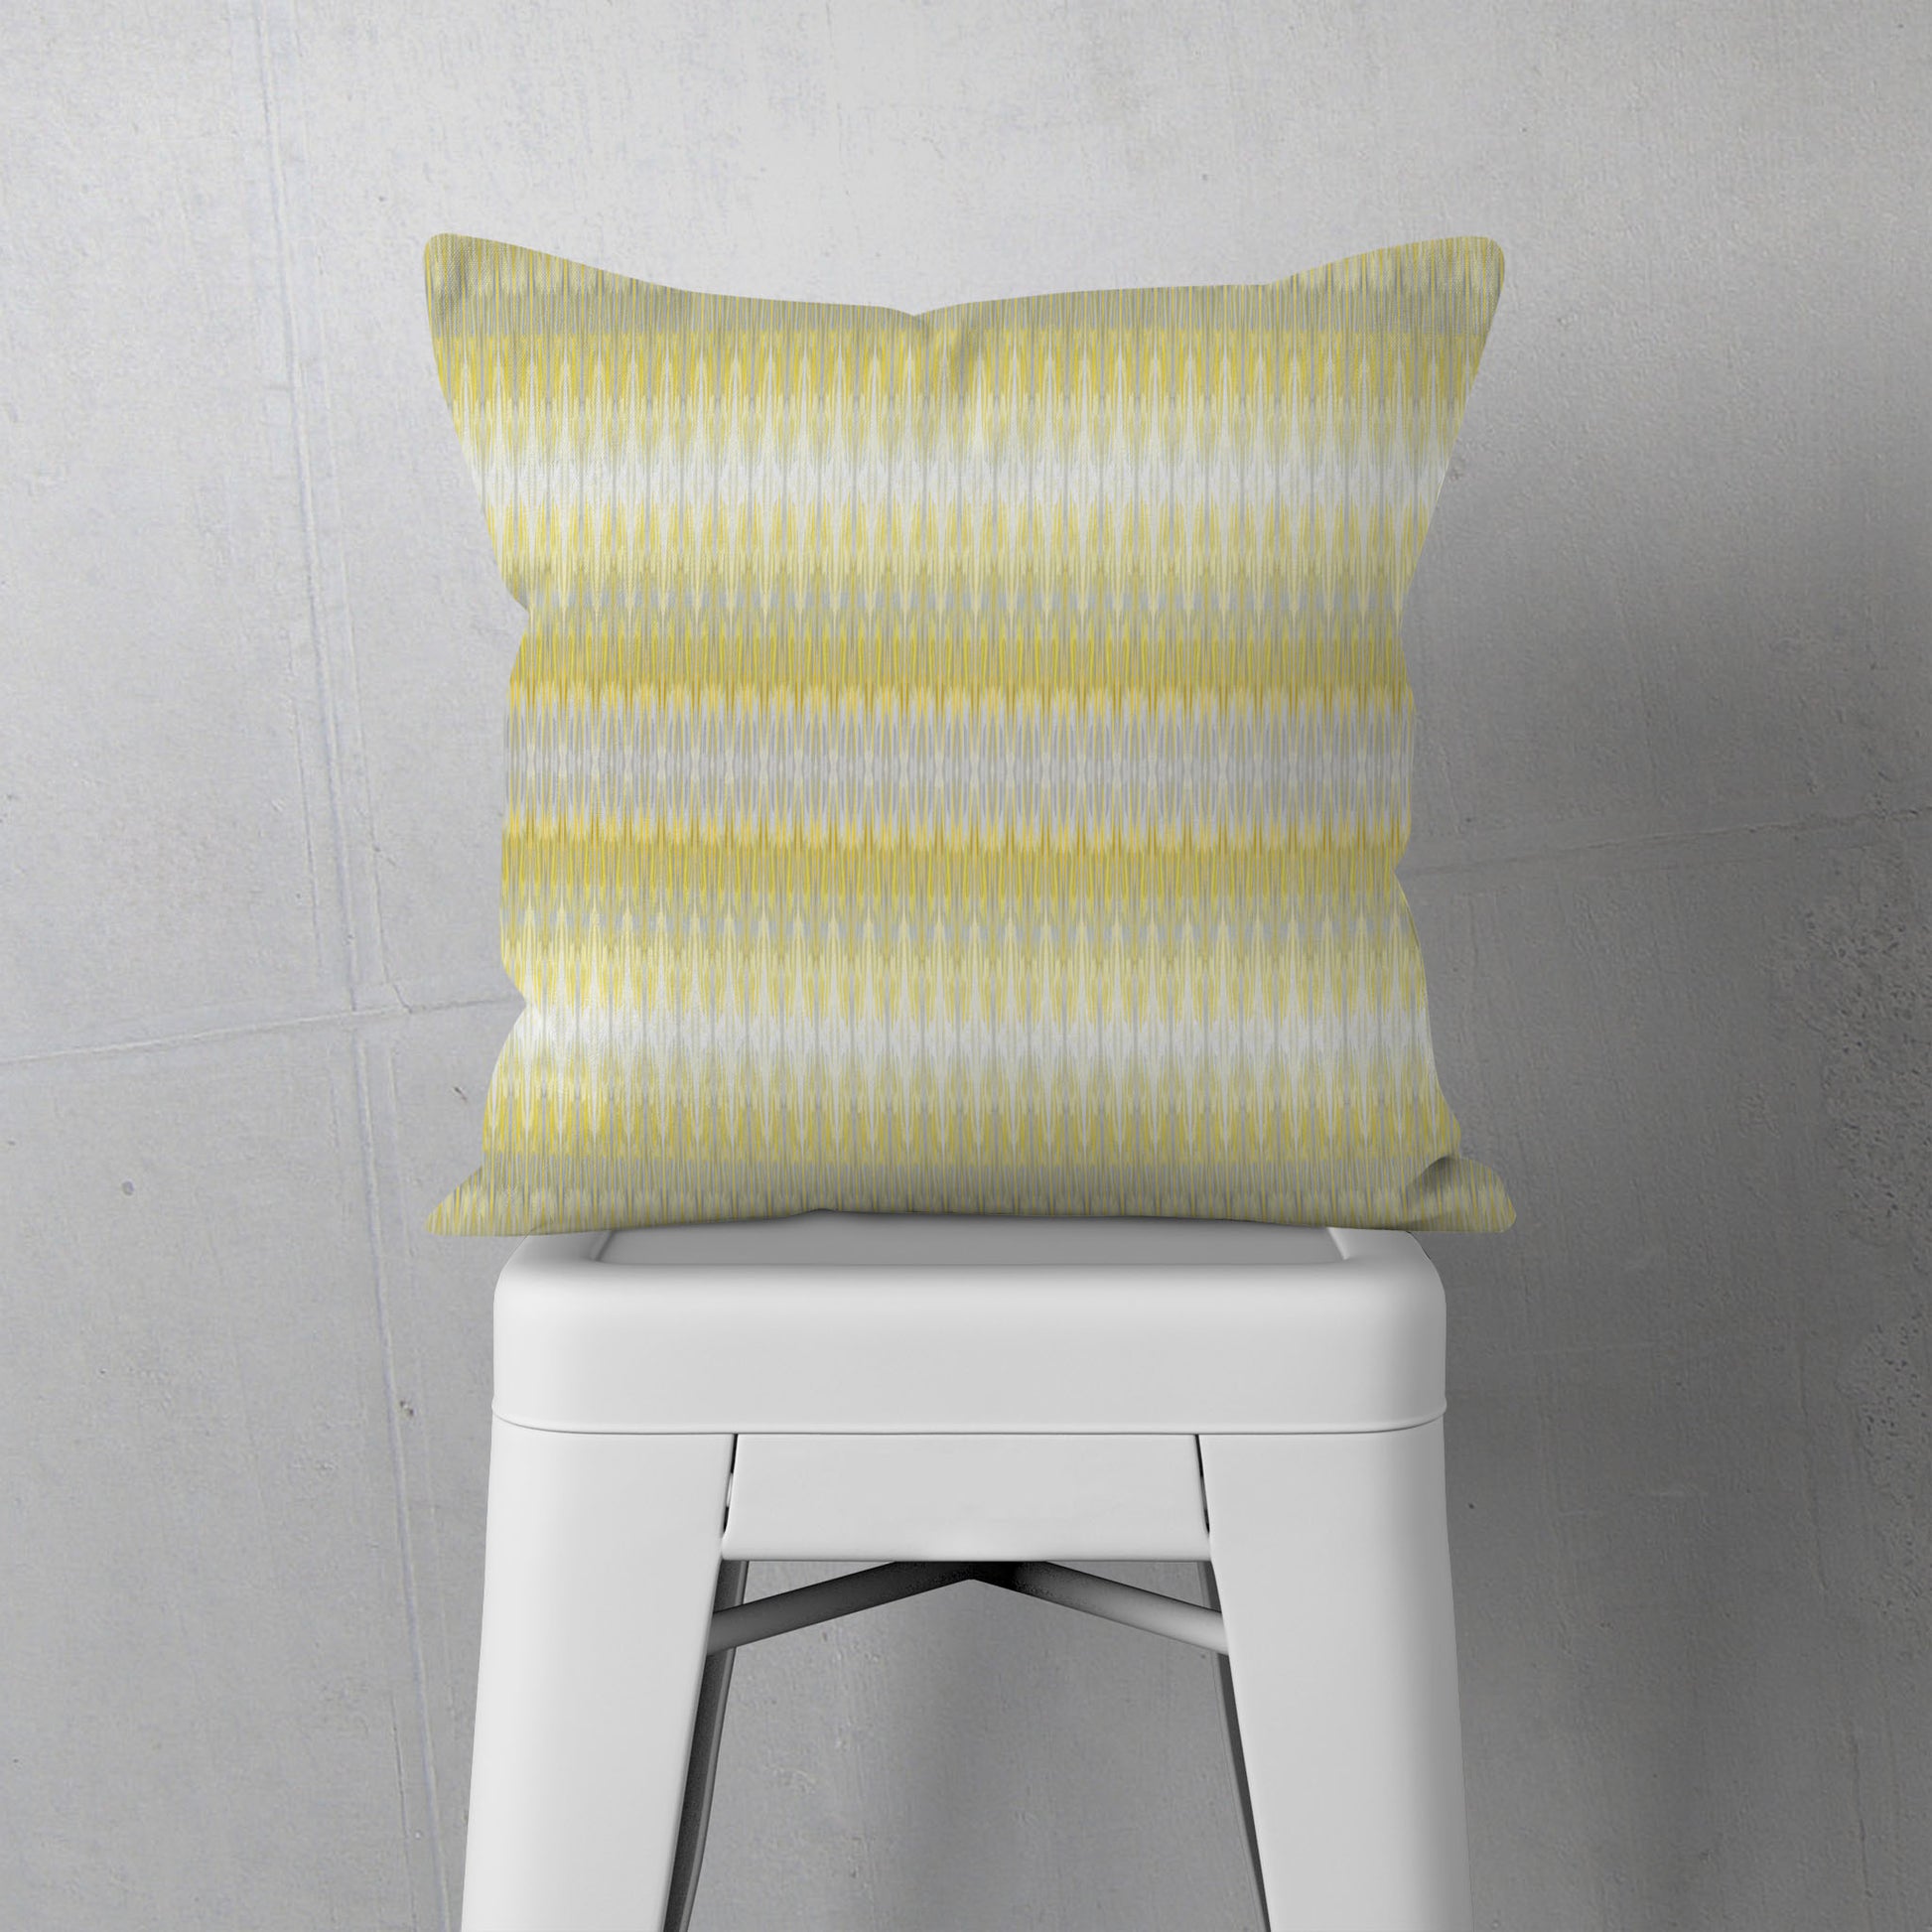 Square pillow featuring hand painted yellow and grey stripe, sitting on a white stool